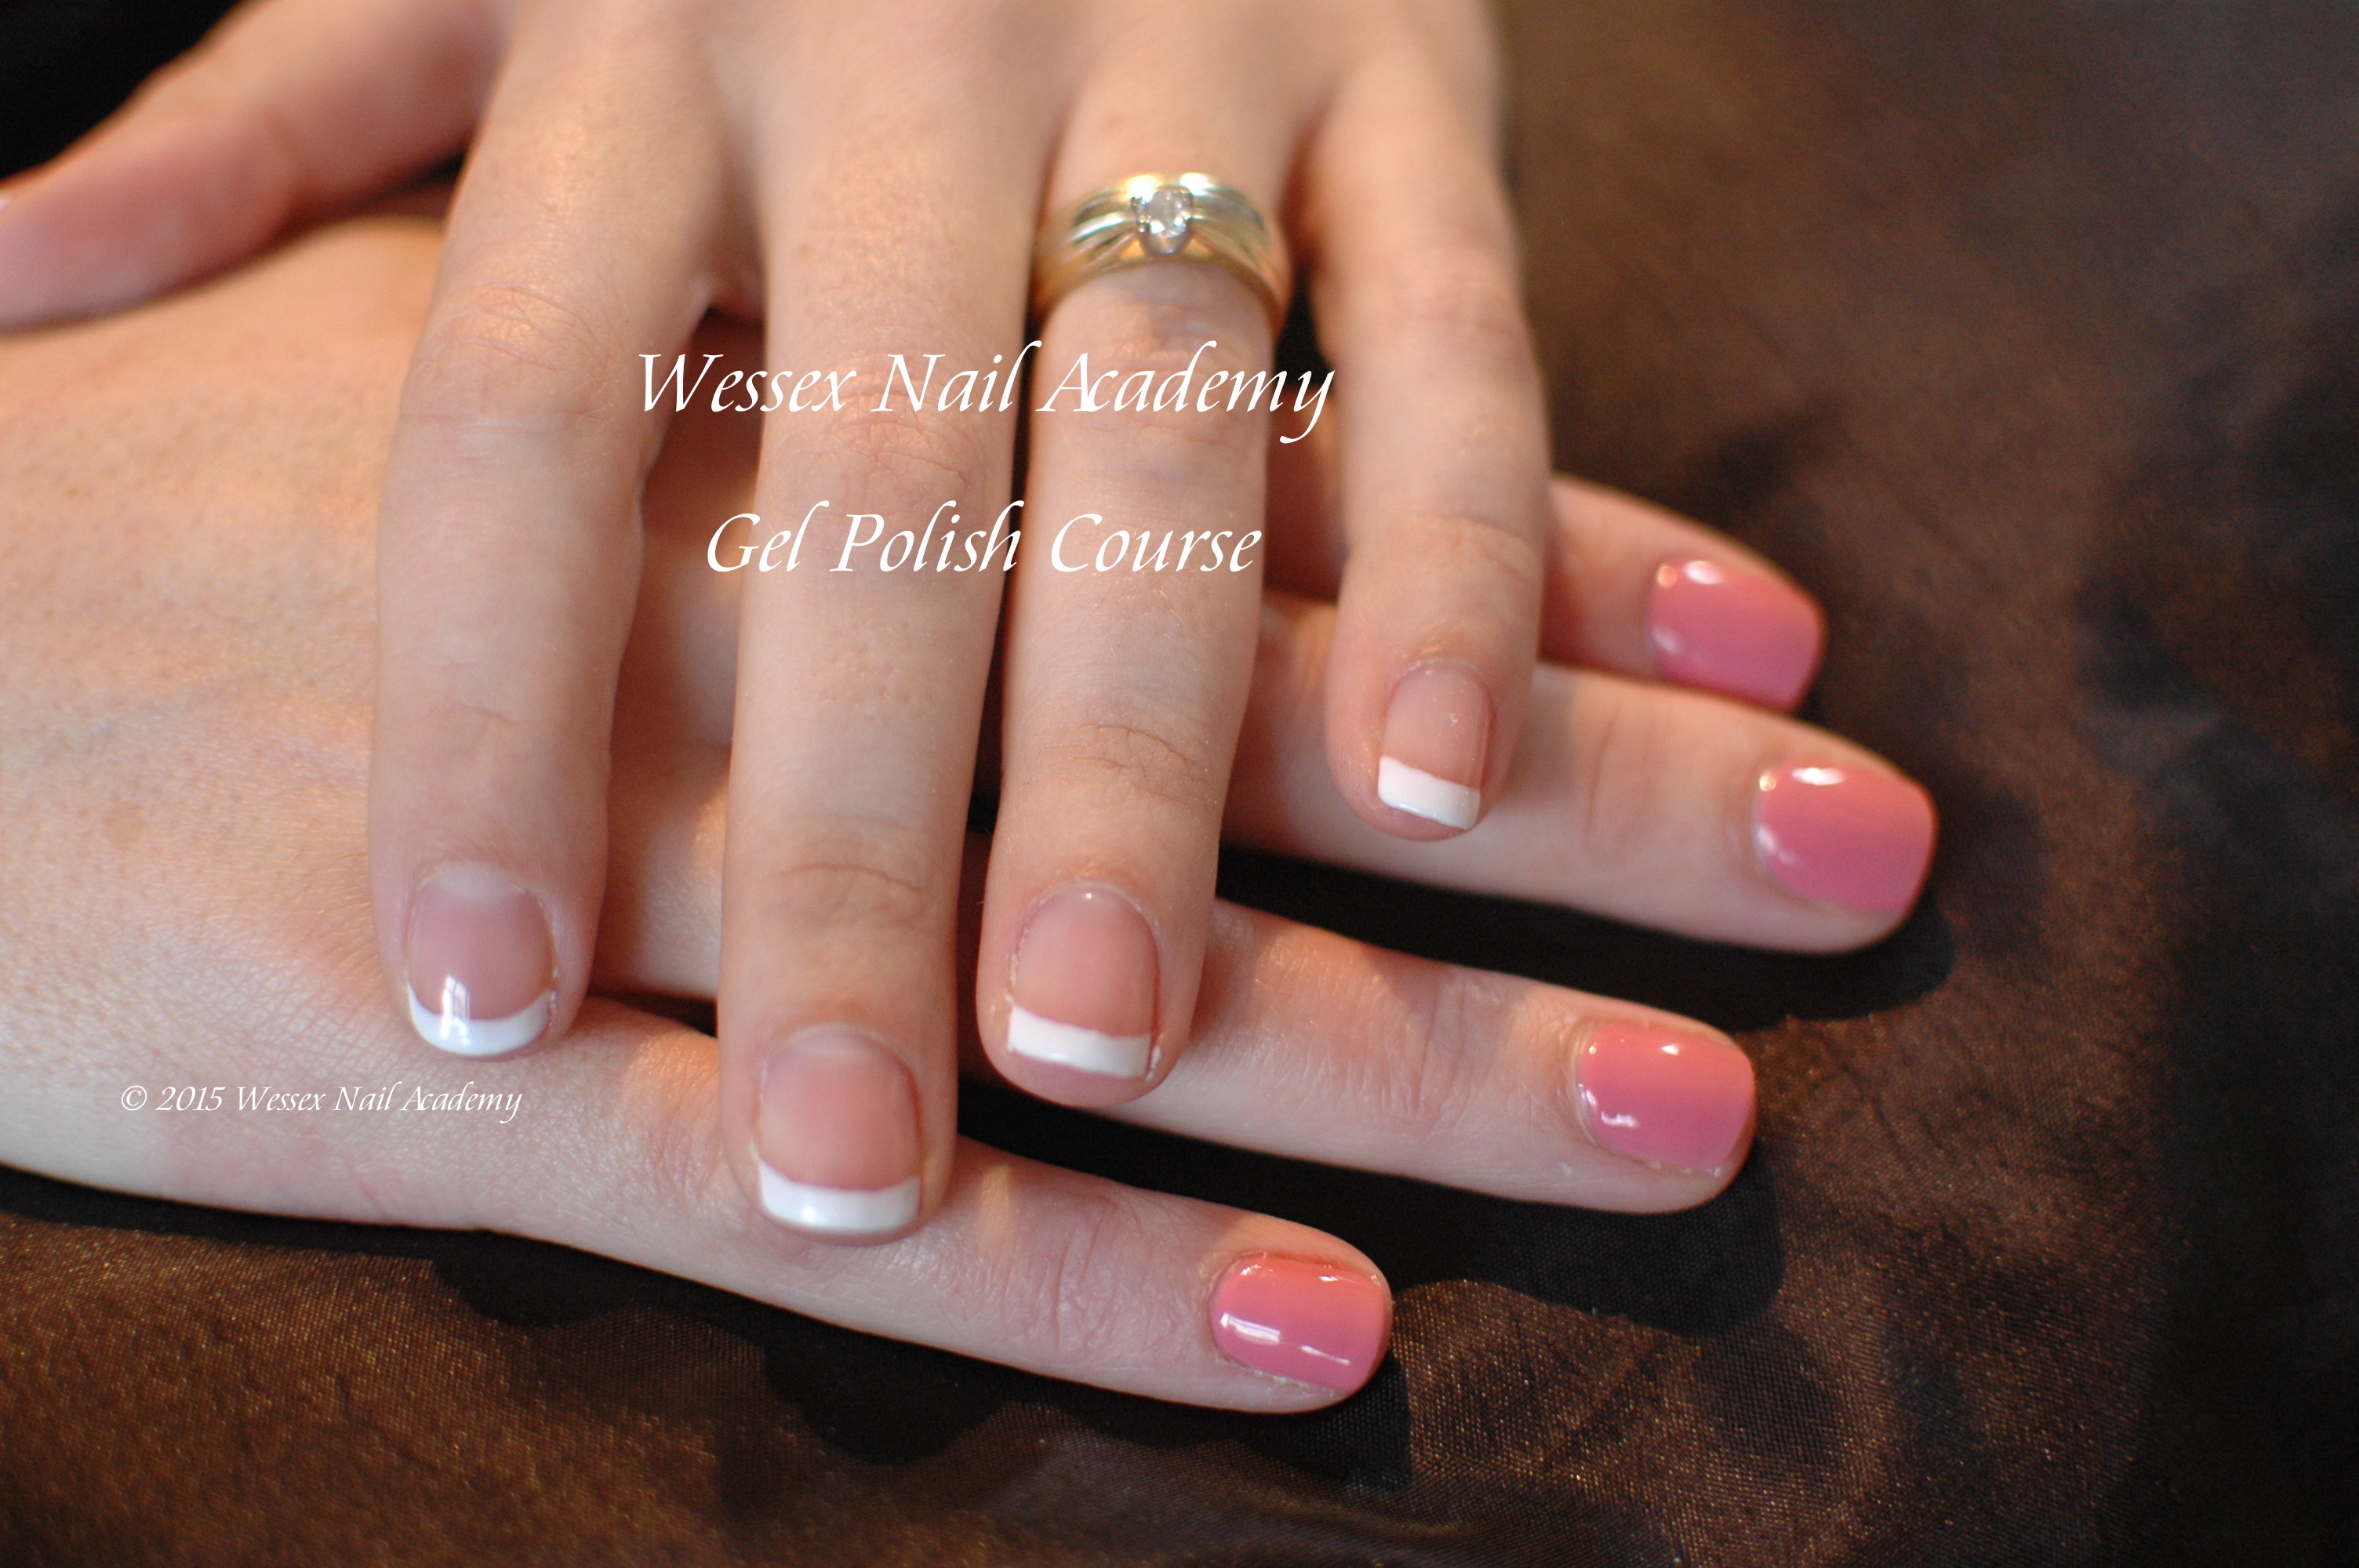 Gel Polish Beginners Course Students work, Nail extension training , nail training course, Wessex Nail Academy Okeford Fitzpaine, Dorset